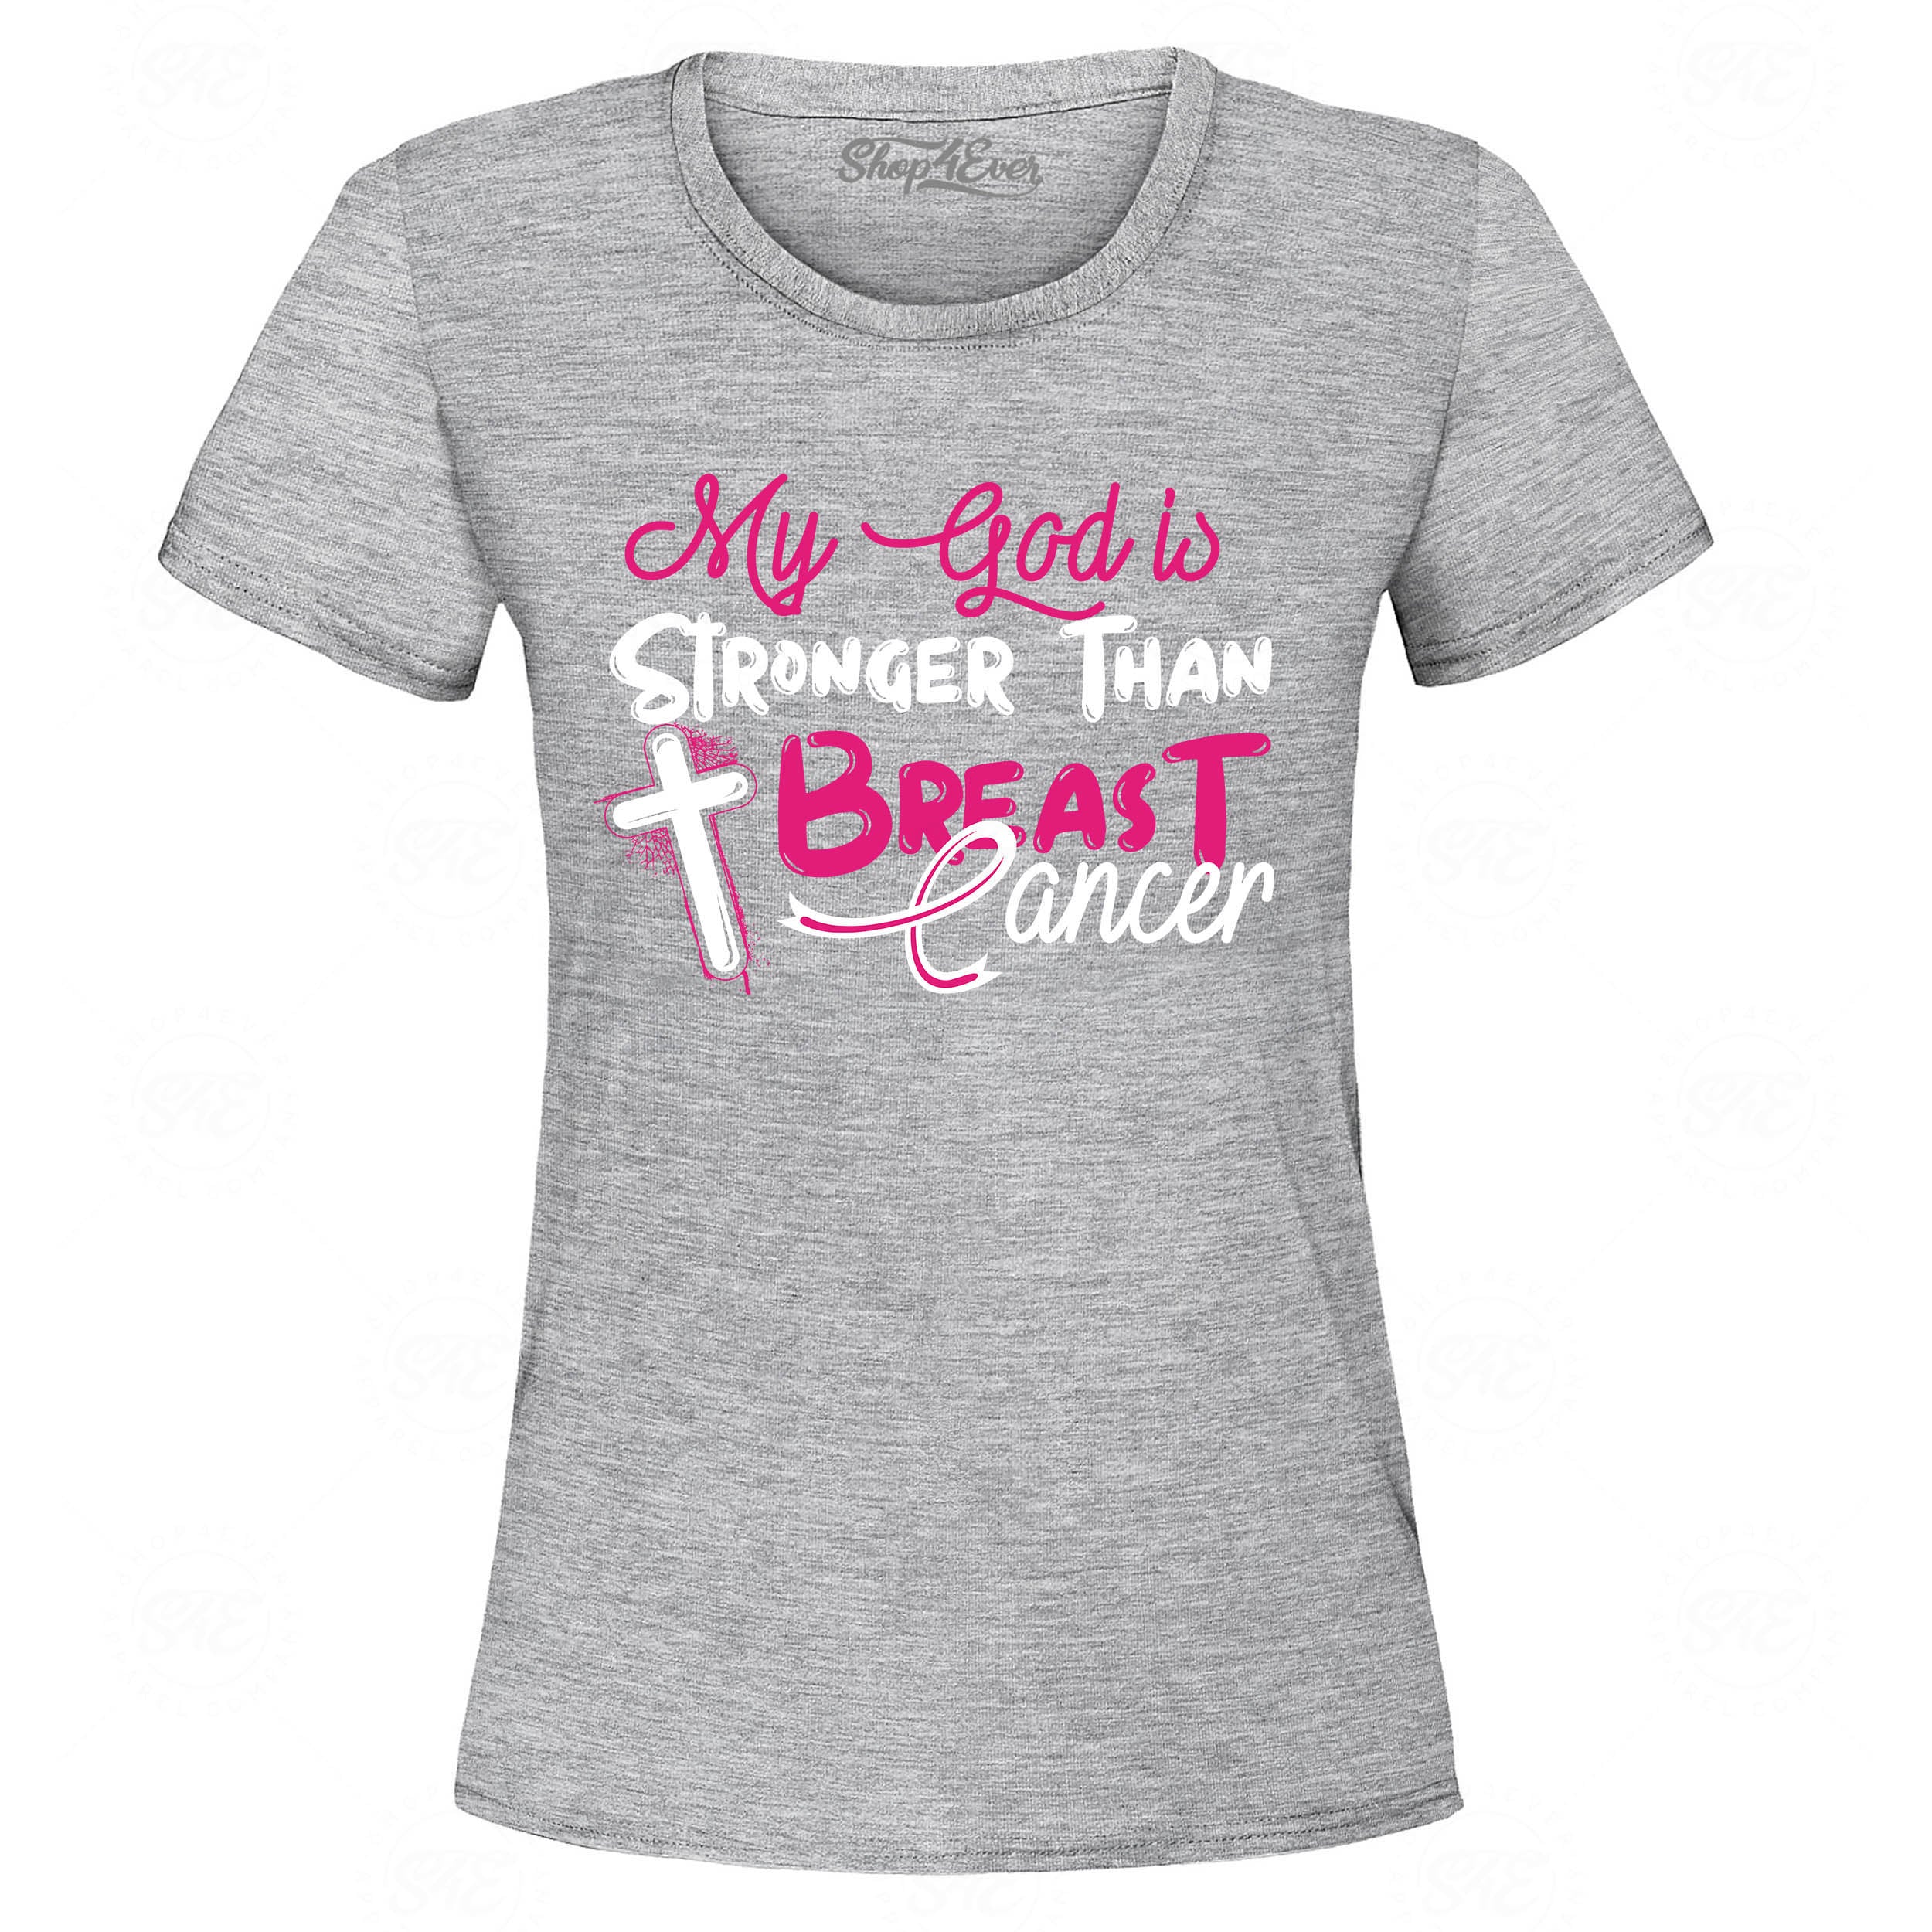 My God is Stronger Than Breast Cancer Women's T-Shirt Pink Ribbon Awareness Tee